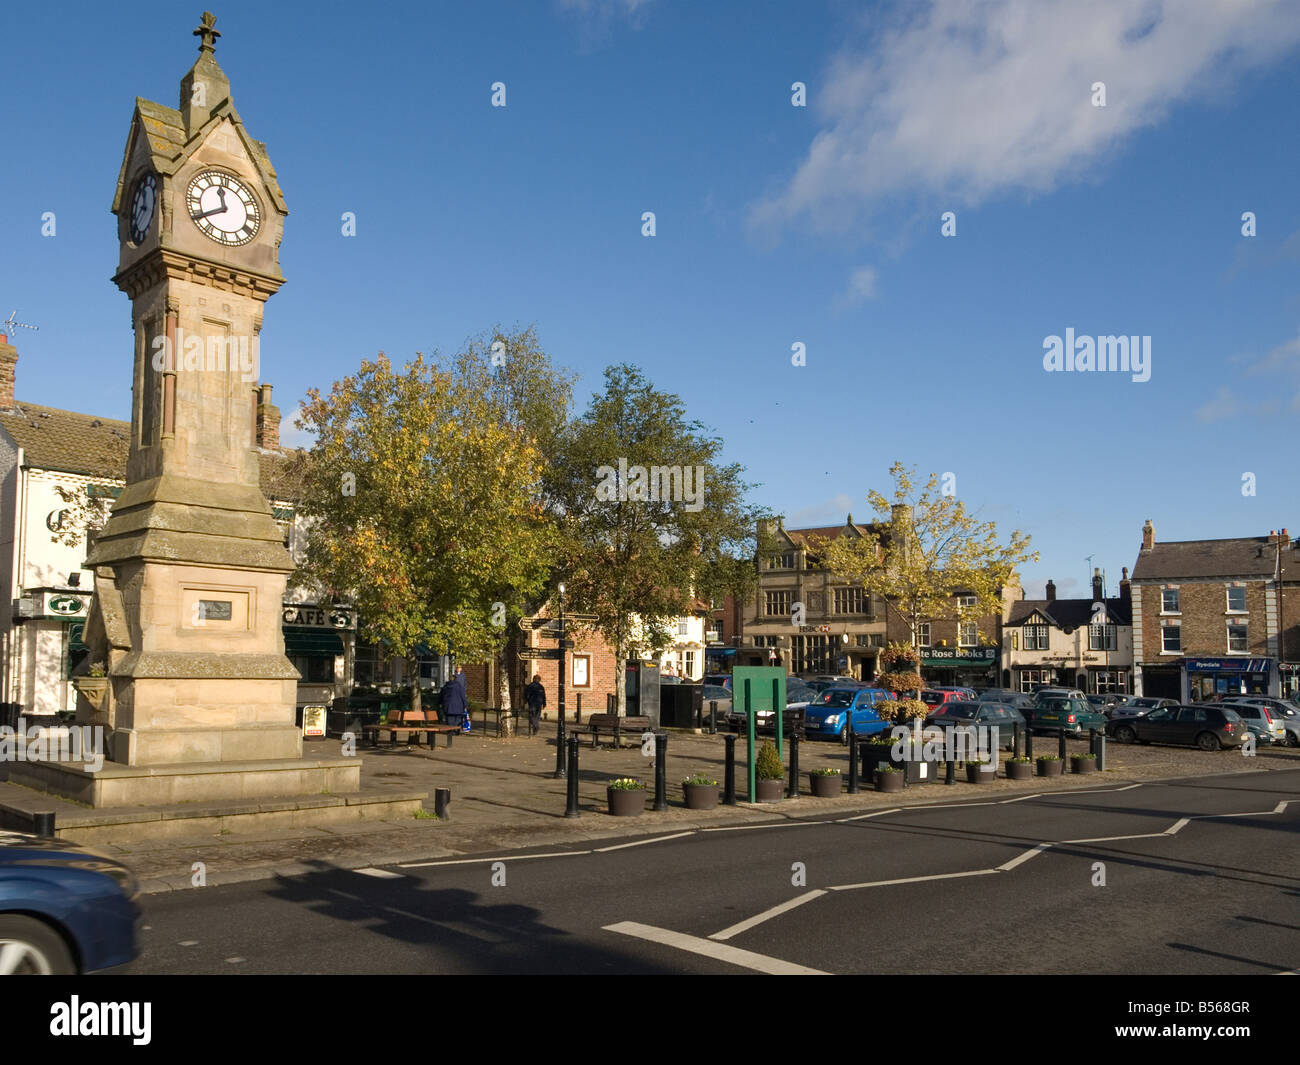 The town clock in the Market Place in Thirsk North Yorkshire UK Stock Photo